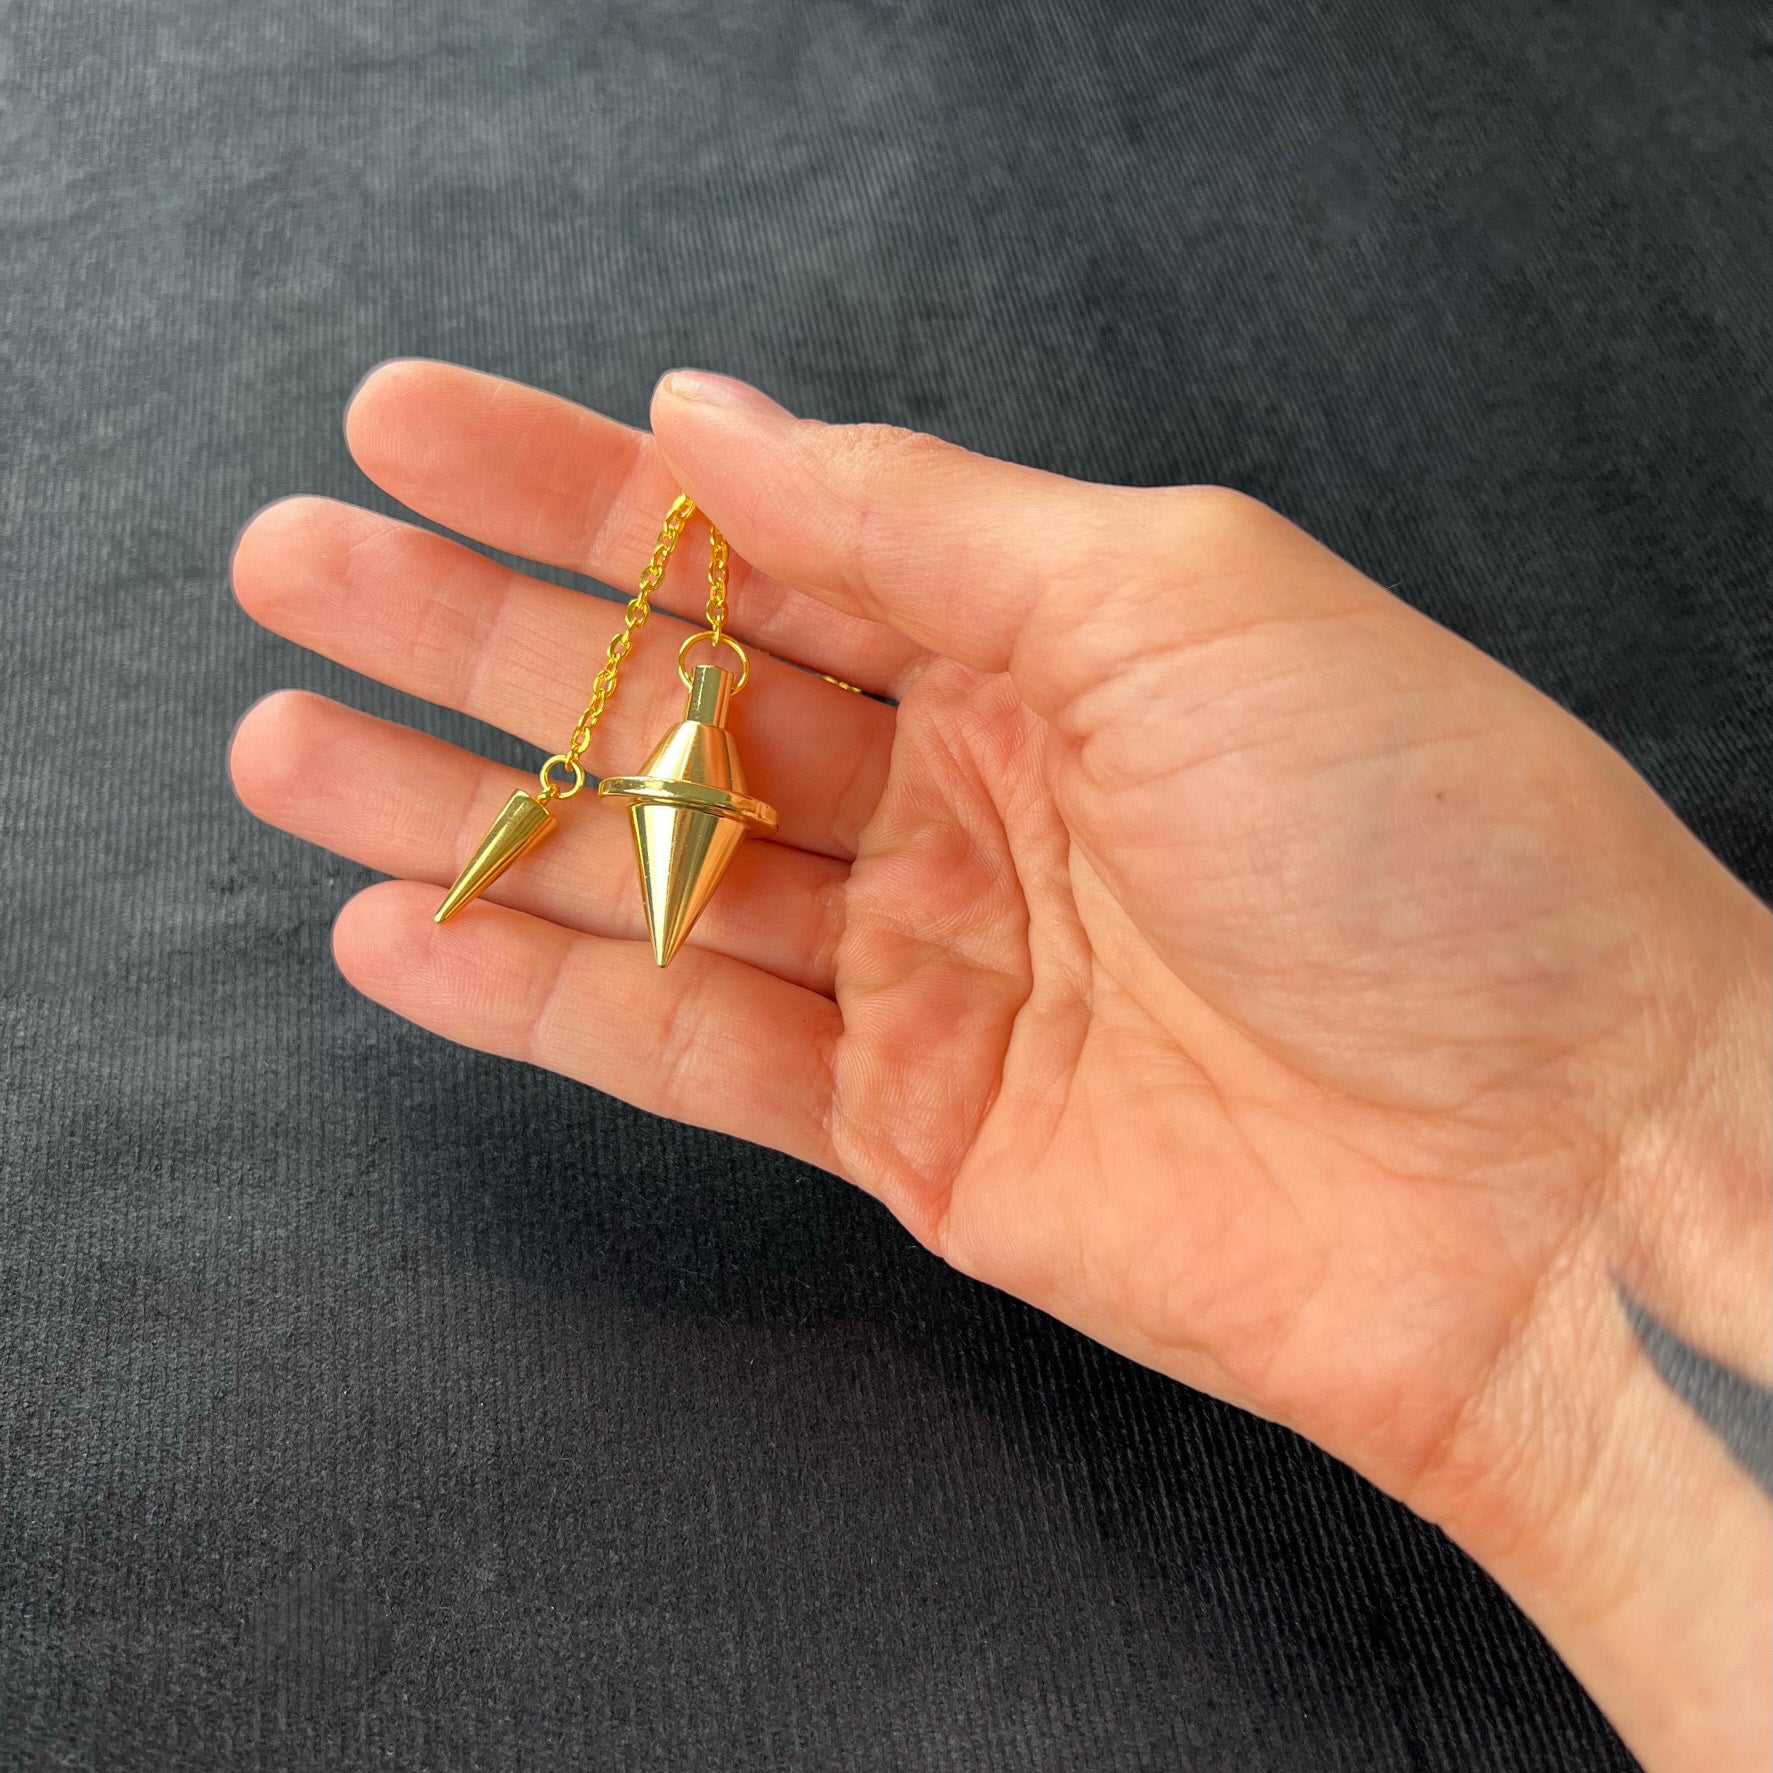 Golden double cone pendulum with a spike charm - The French Witch shop